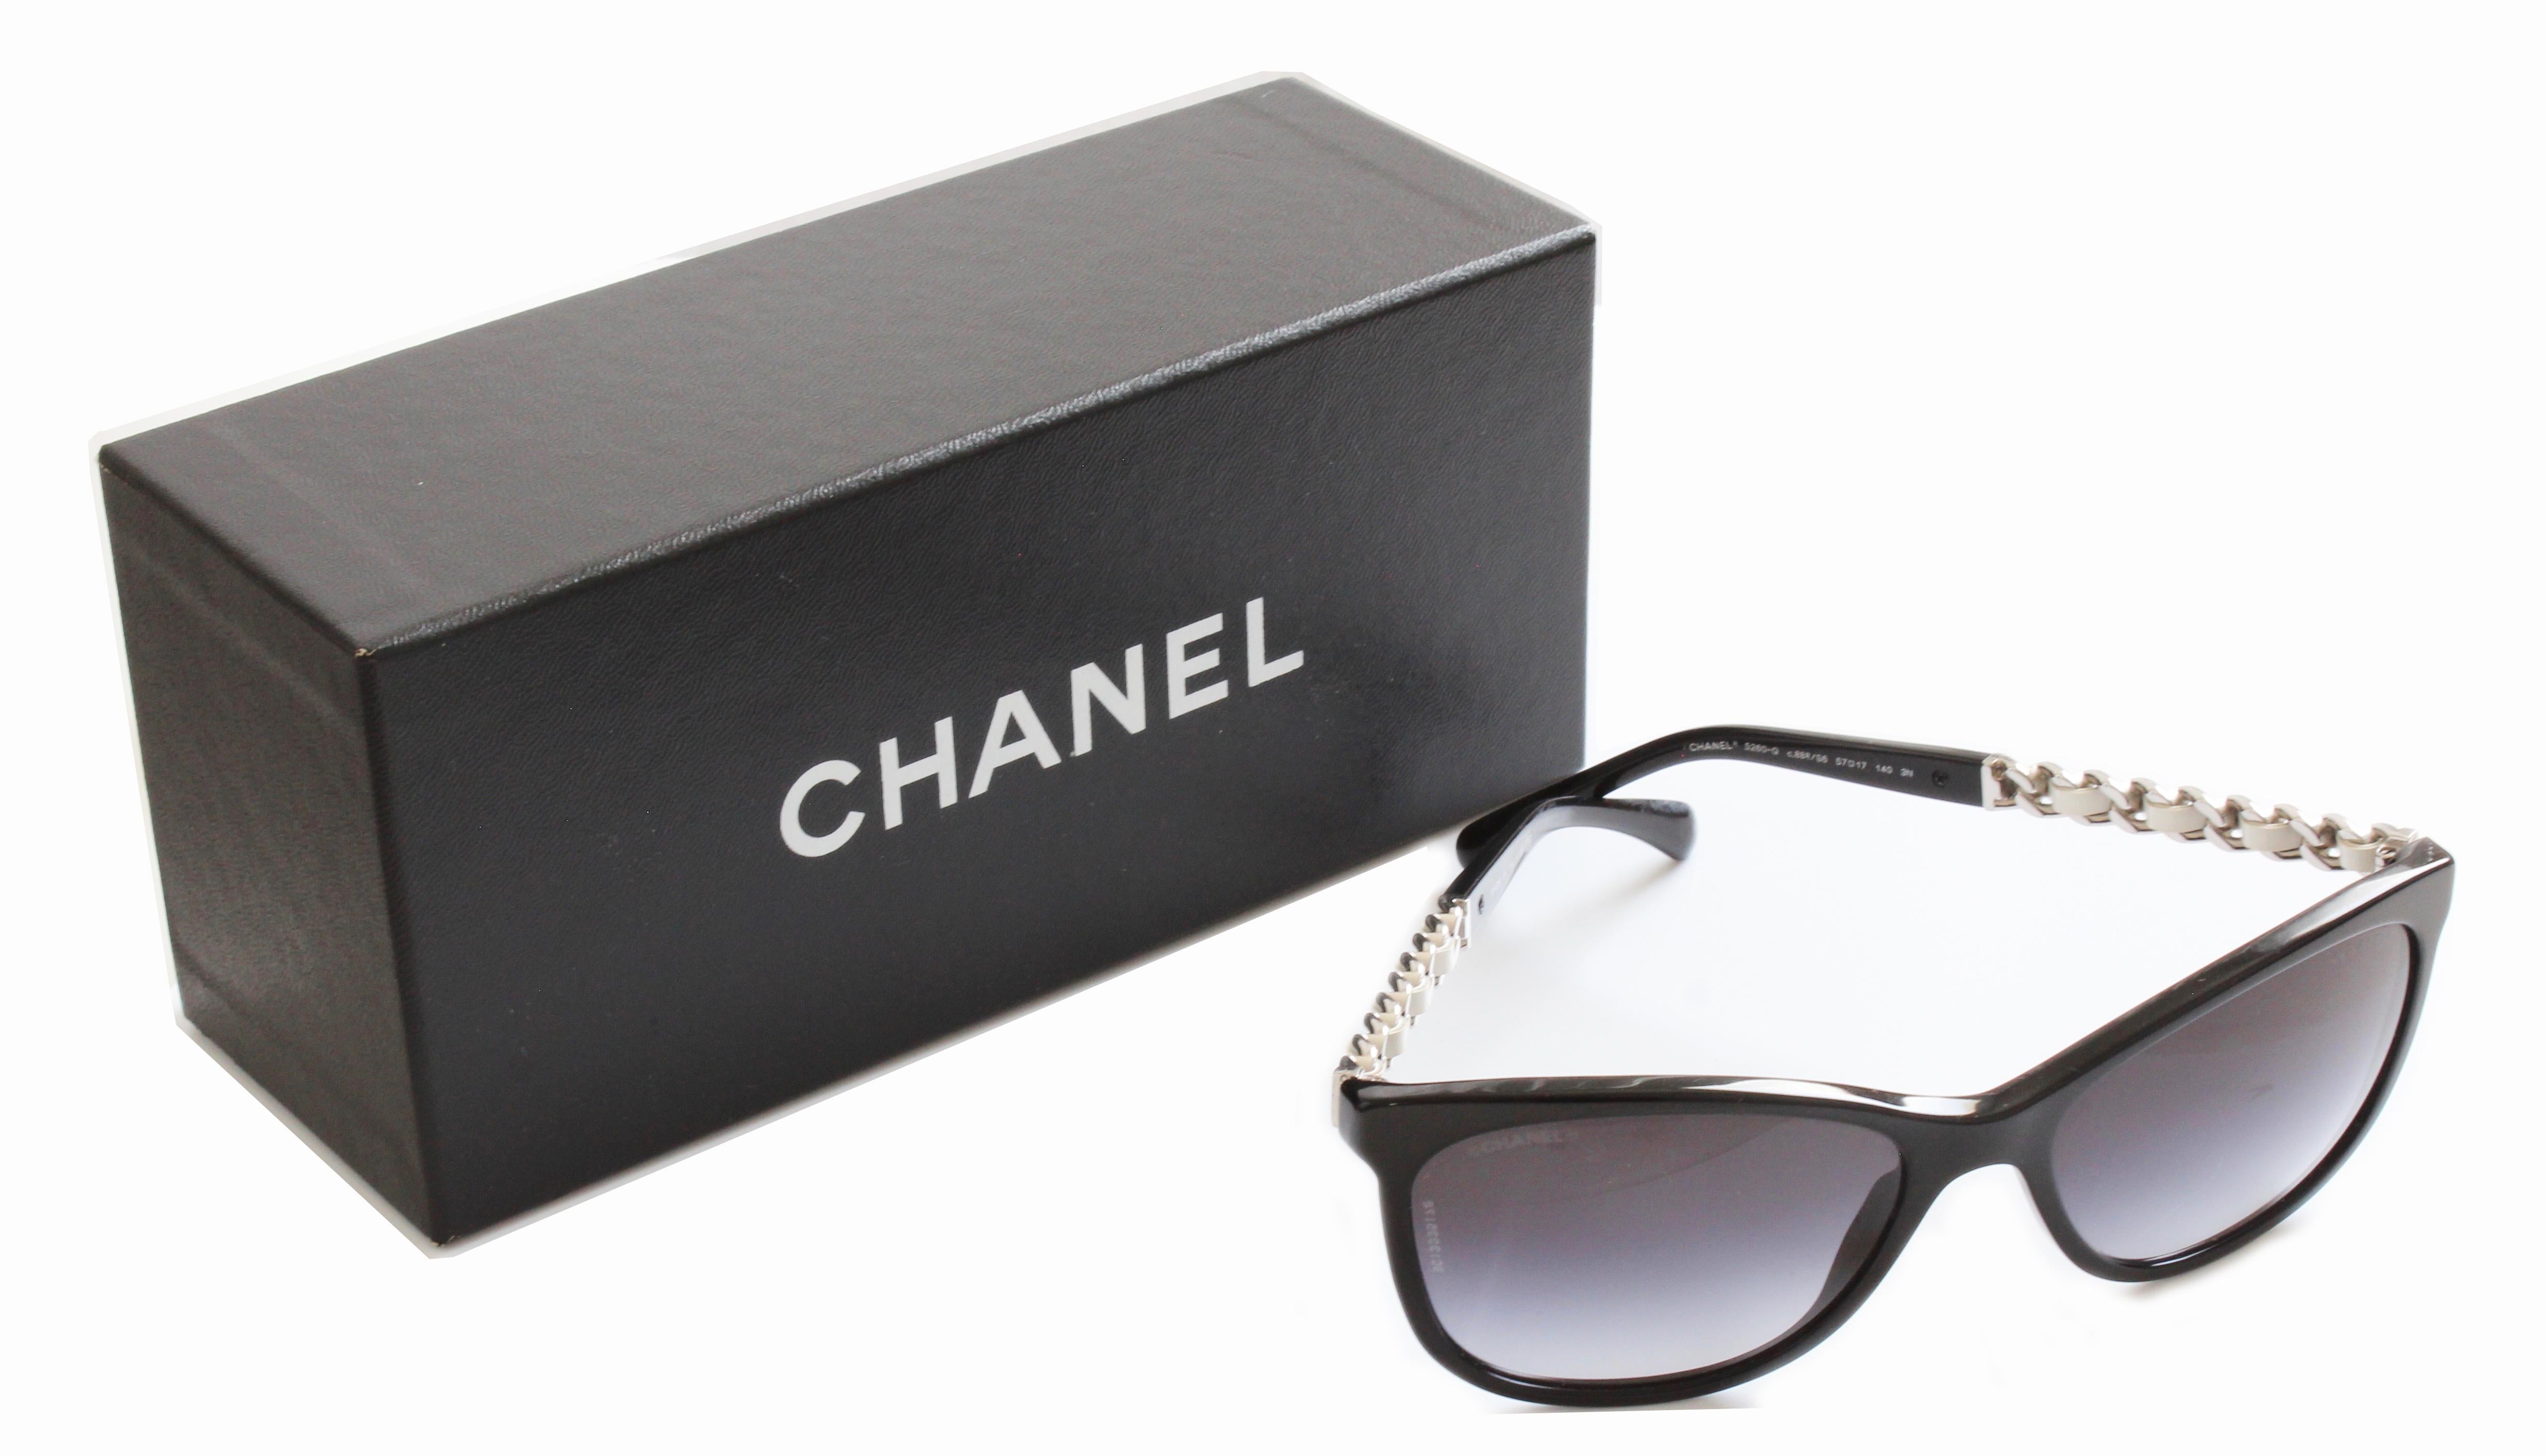 Here's a pair of authentic sunglasses from Chanel.  Stamped as model number 5260-Q c.888/S6, these cat eye style glasses feature silver chain and white leather arms and black gradient to gray lenses.  Comes with their original Chanel eye glass case,